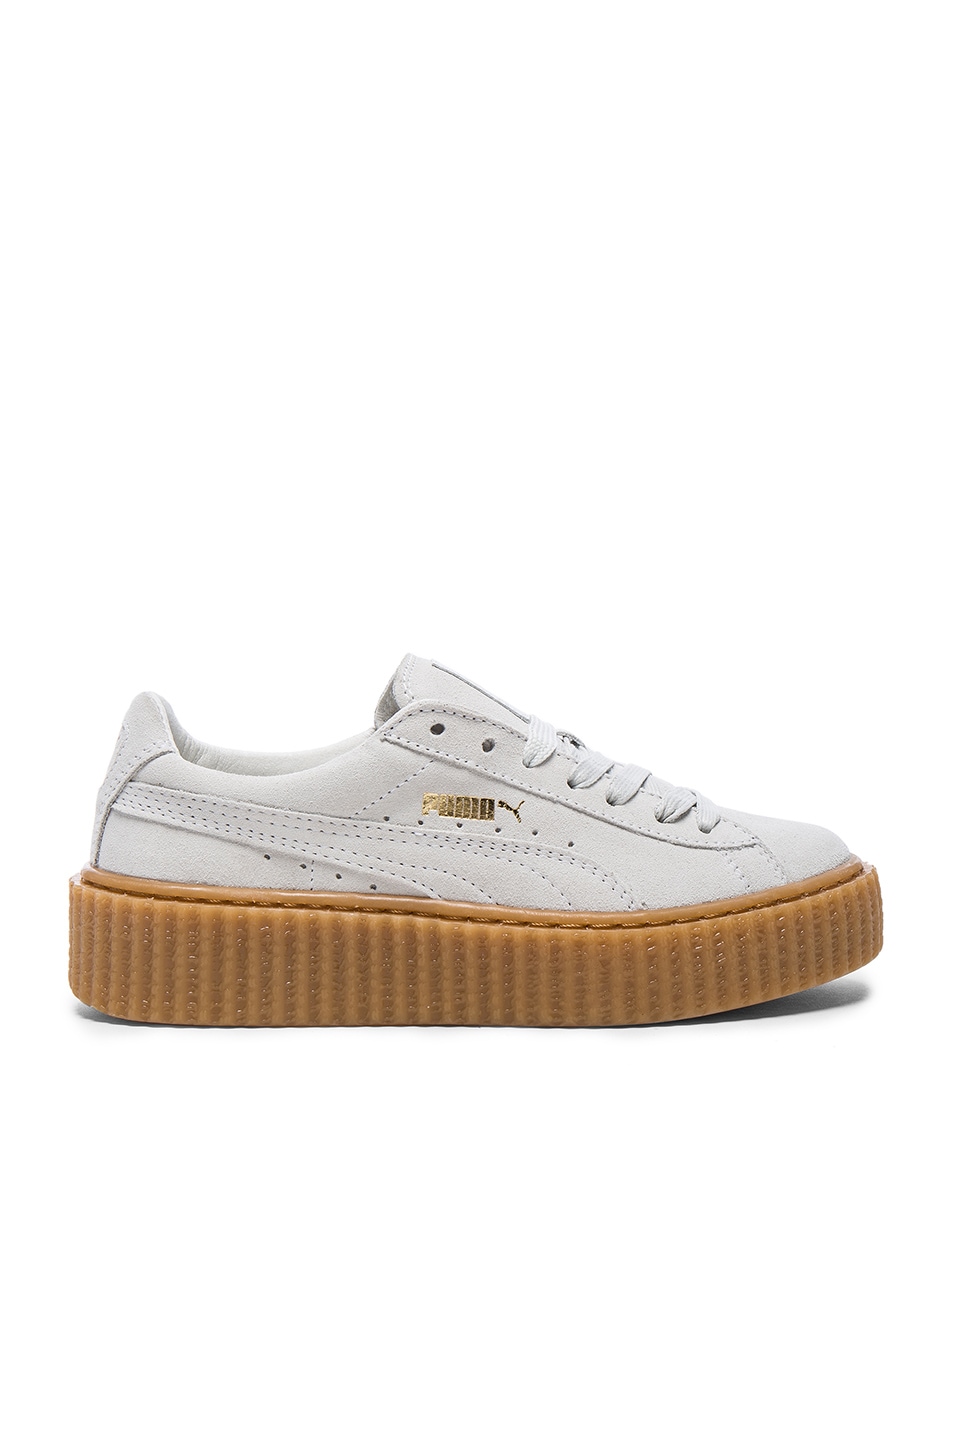 Image 1 of Fenty by Puma Suede Creepers in Star White